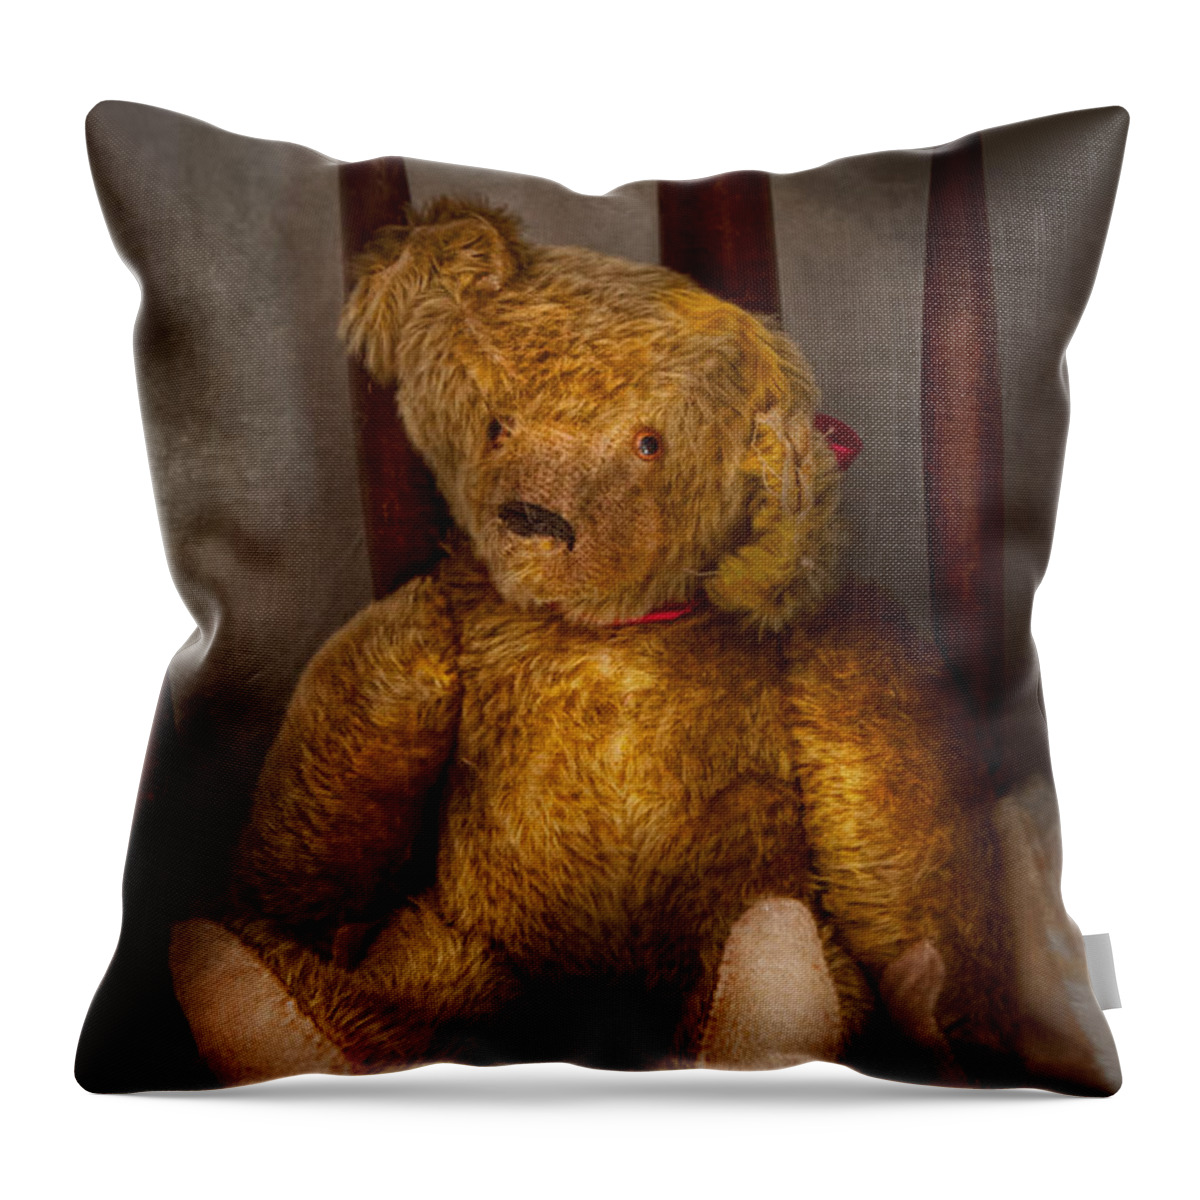 Children Throw Pillow featuring the photograph Toy - Teddy Bear - My Teddy Bear by Mike Savad